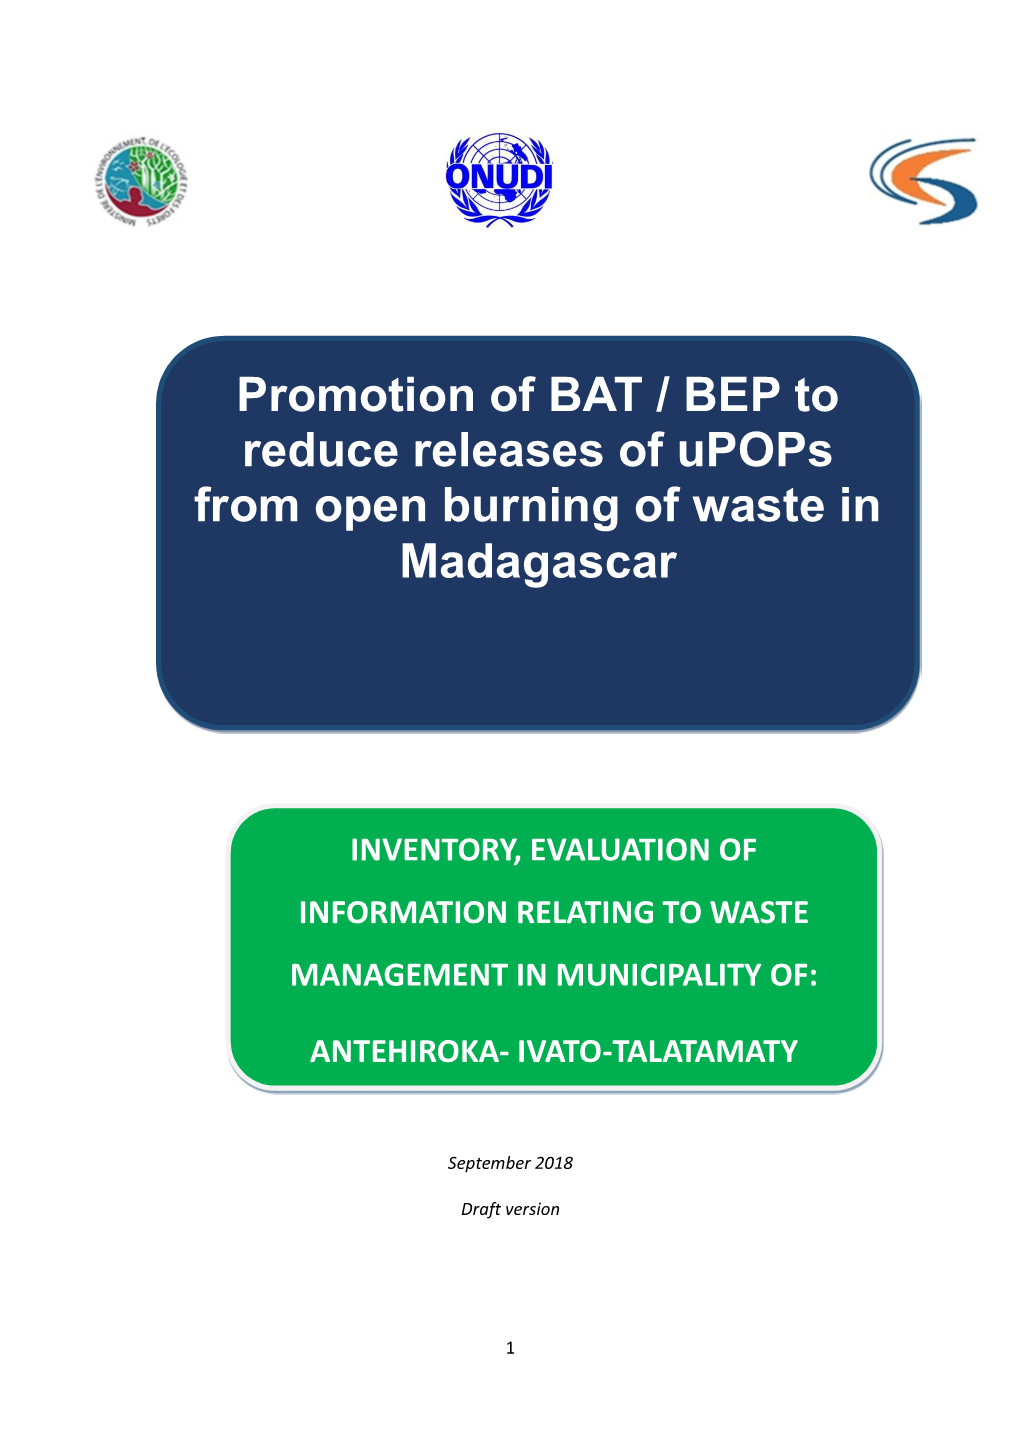 Promotion of BAT / BEP to Reduce Releases of Upops from Open Burning of Waste in Madagascar